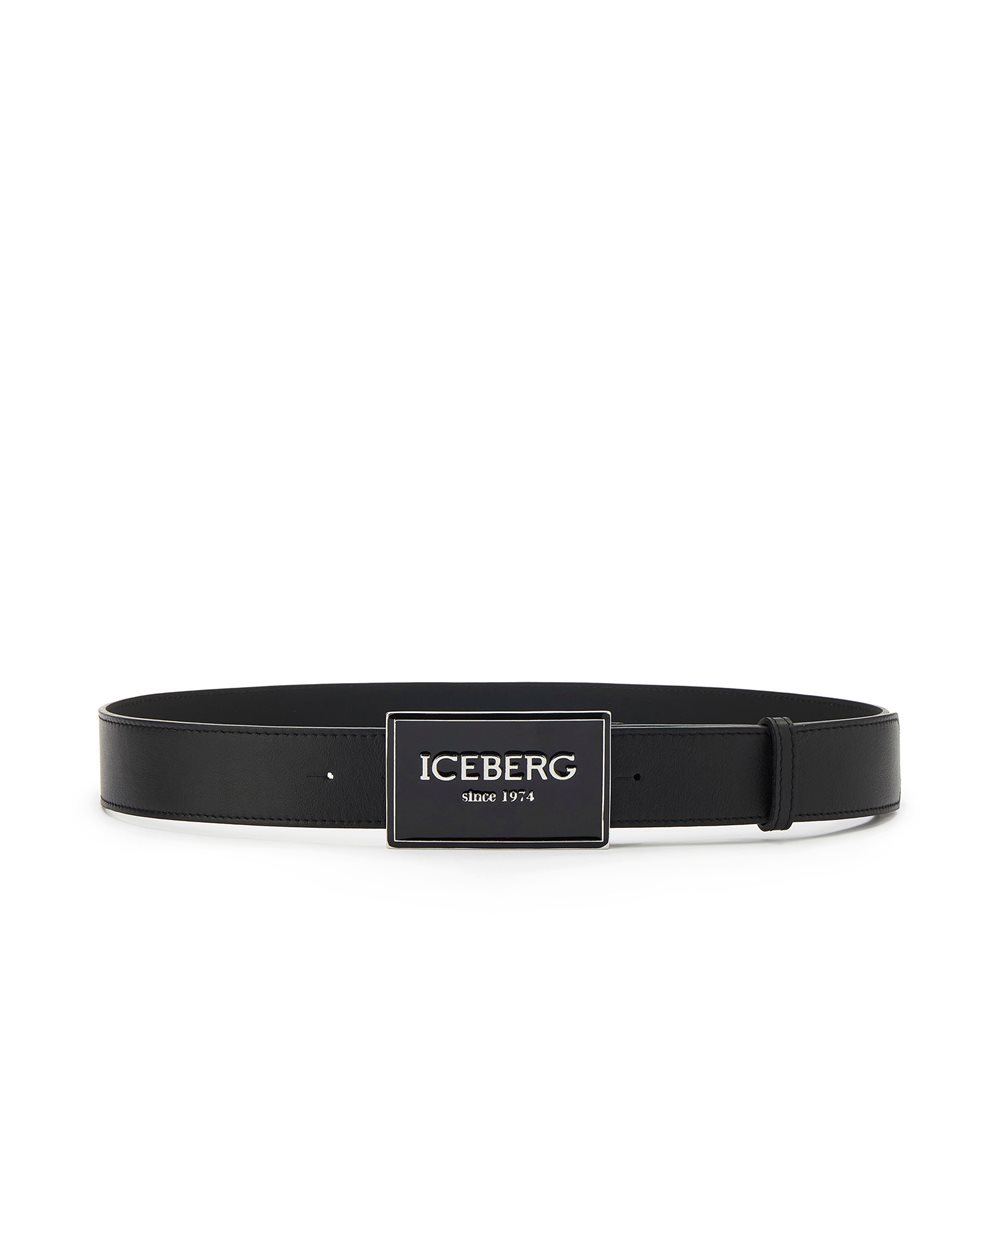 Leather belt with logoed buckle - carosello HP man accessories | Iceberg - Official Website